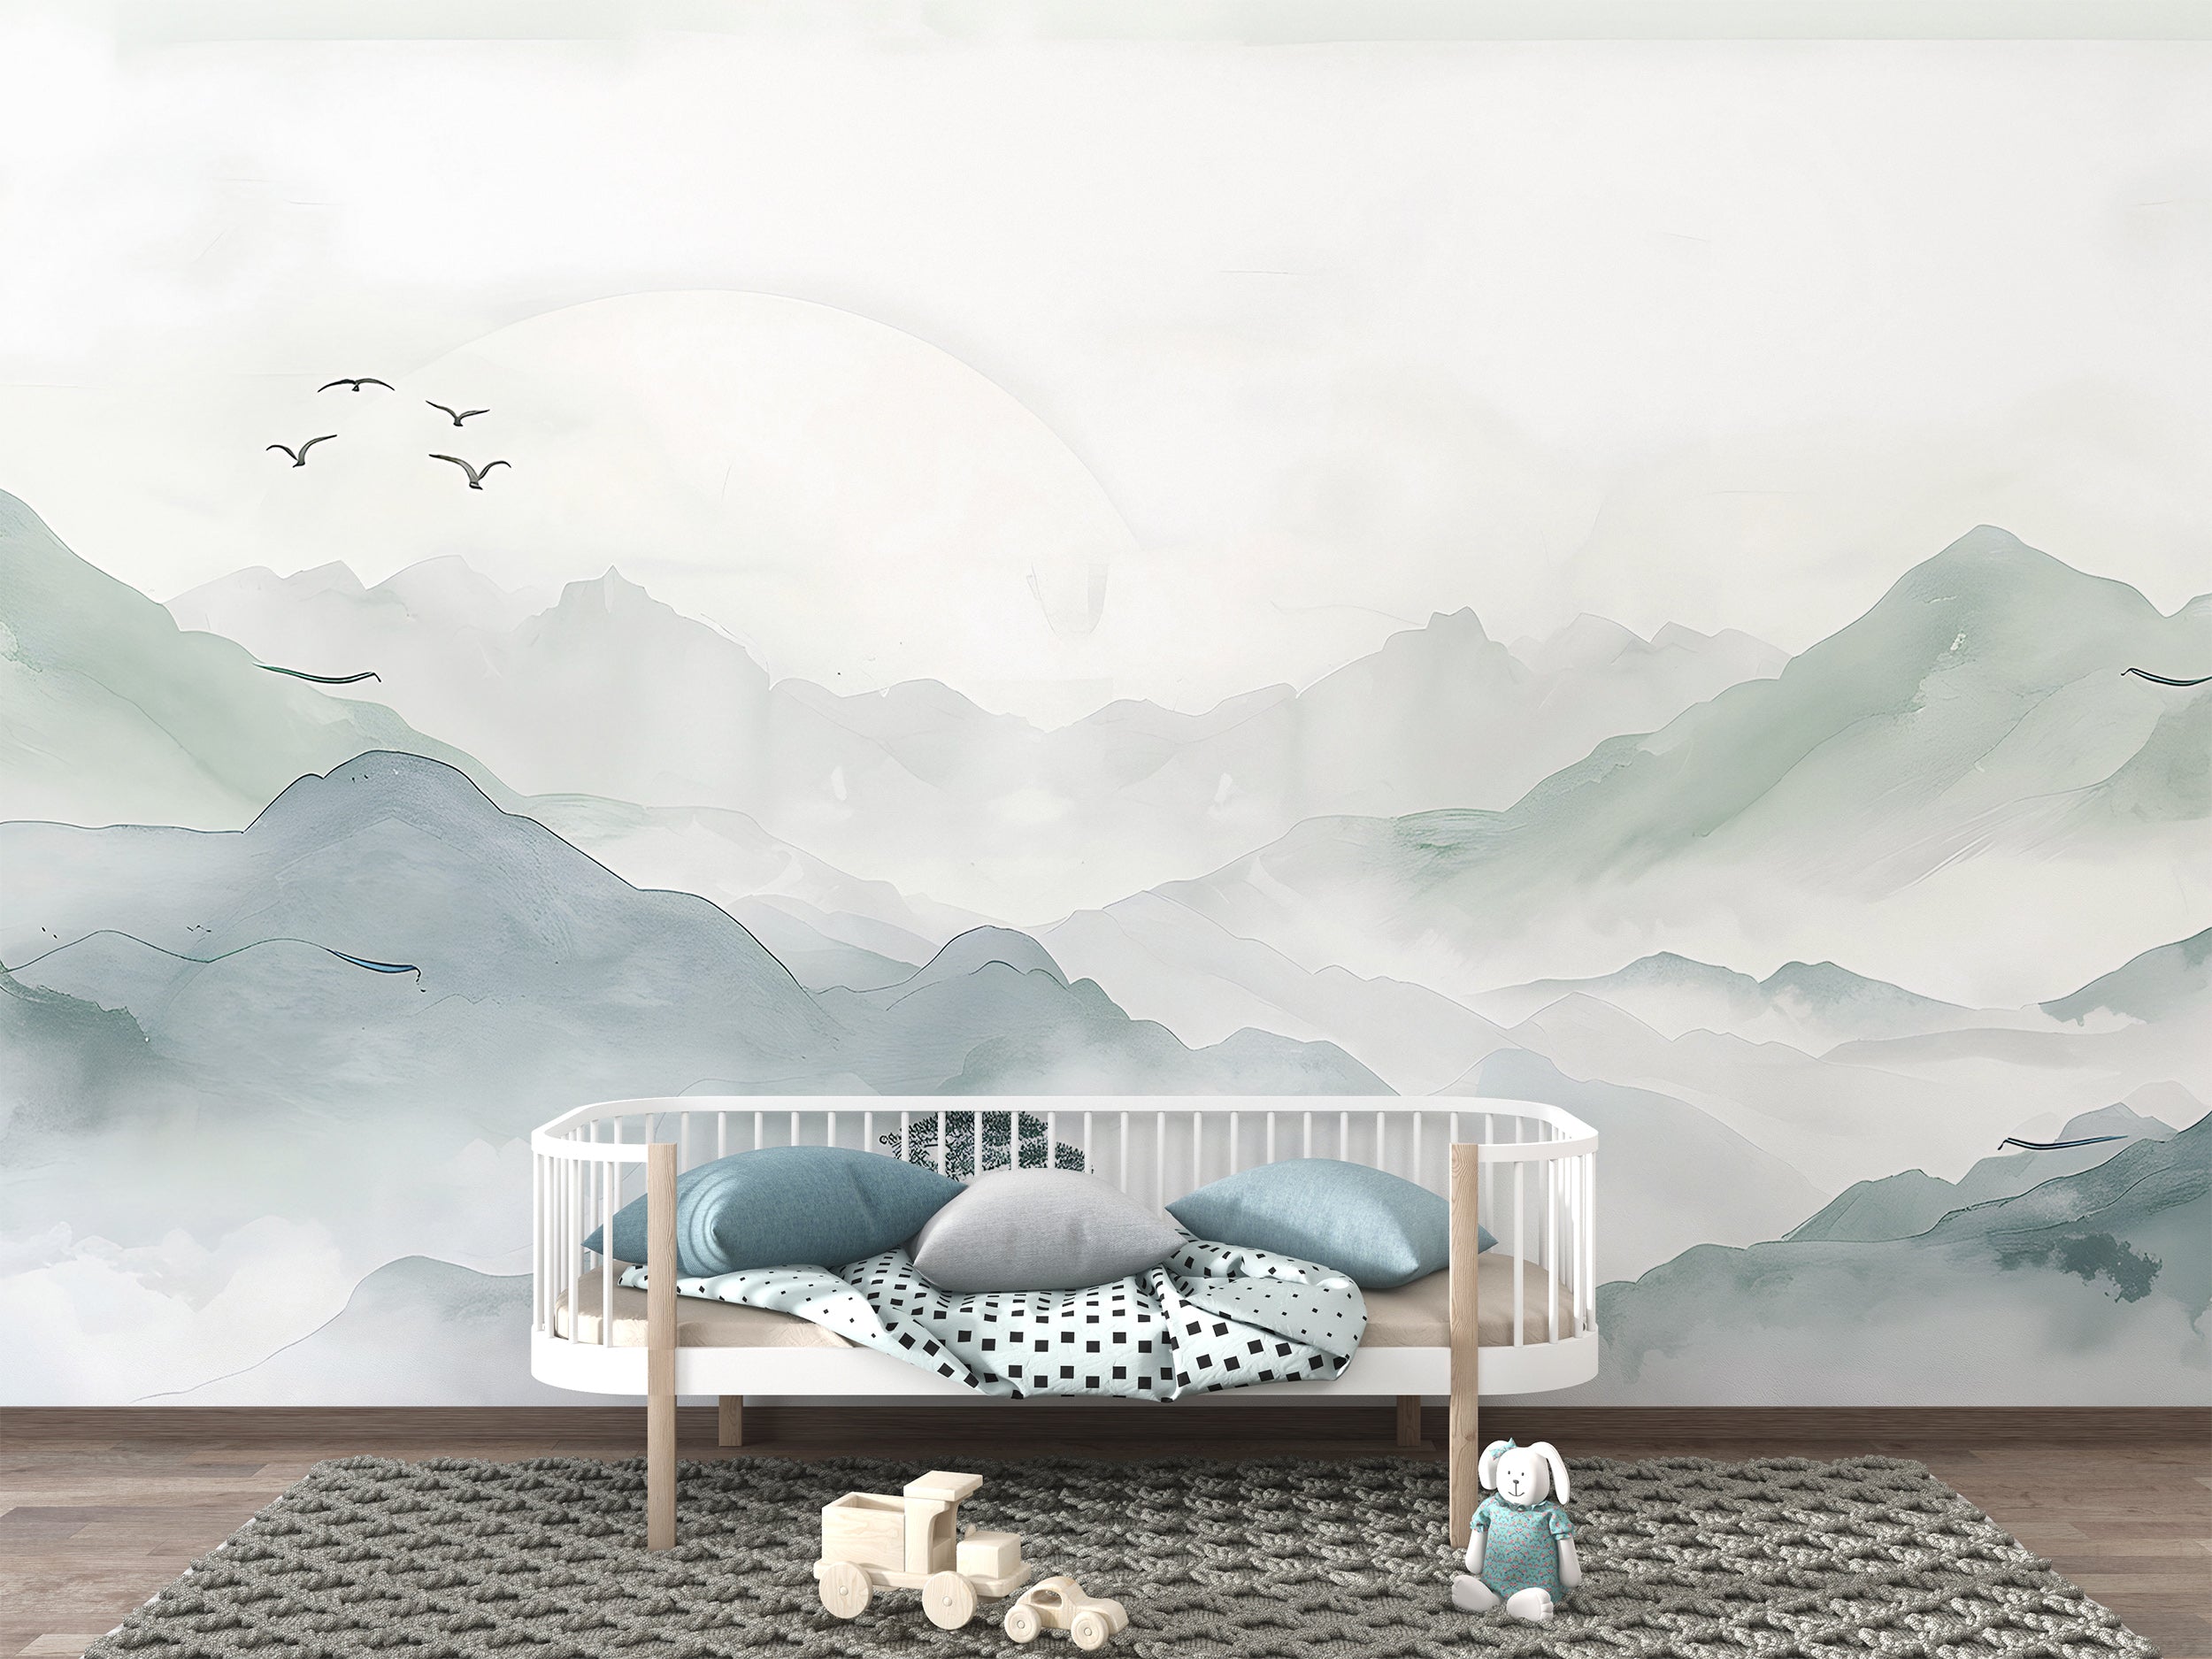 Pastel Mint Mountain Landscape Wall Mural, Self-adhesive Soft Green Japanese Nature Wallpaper, Removable Minimalistic Nursery Wall Decal